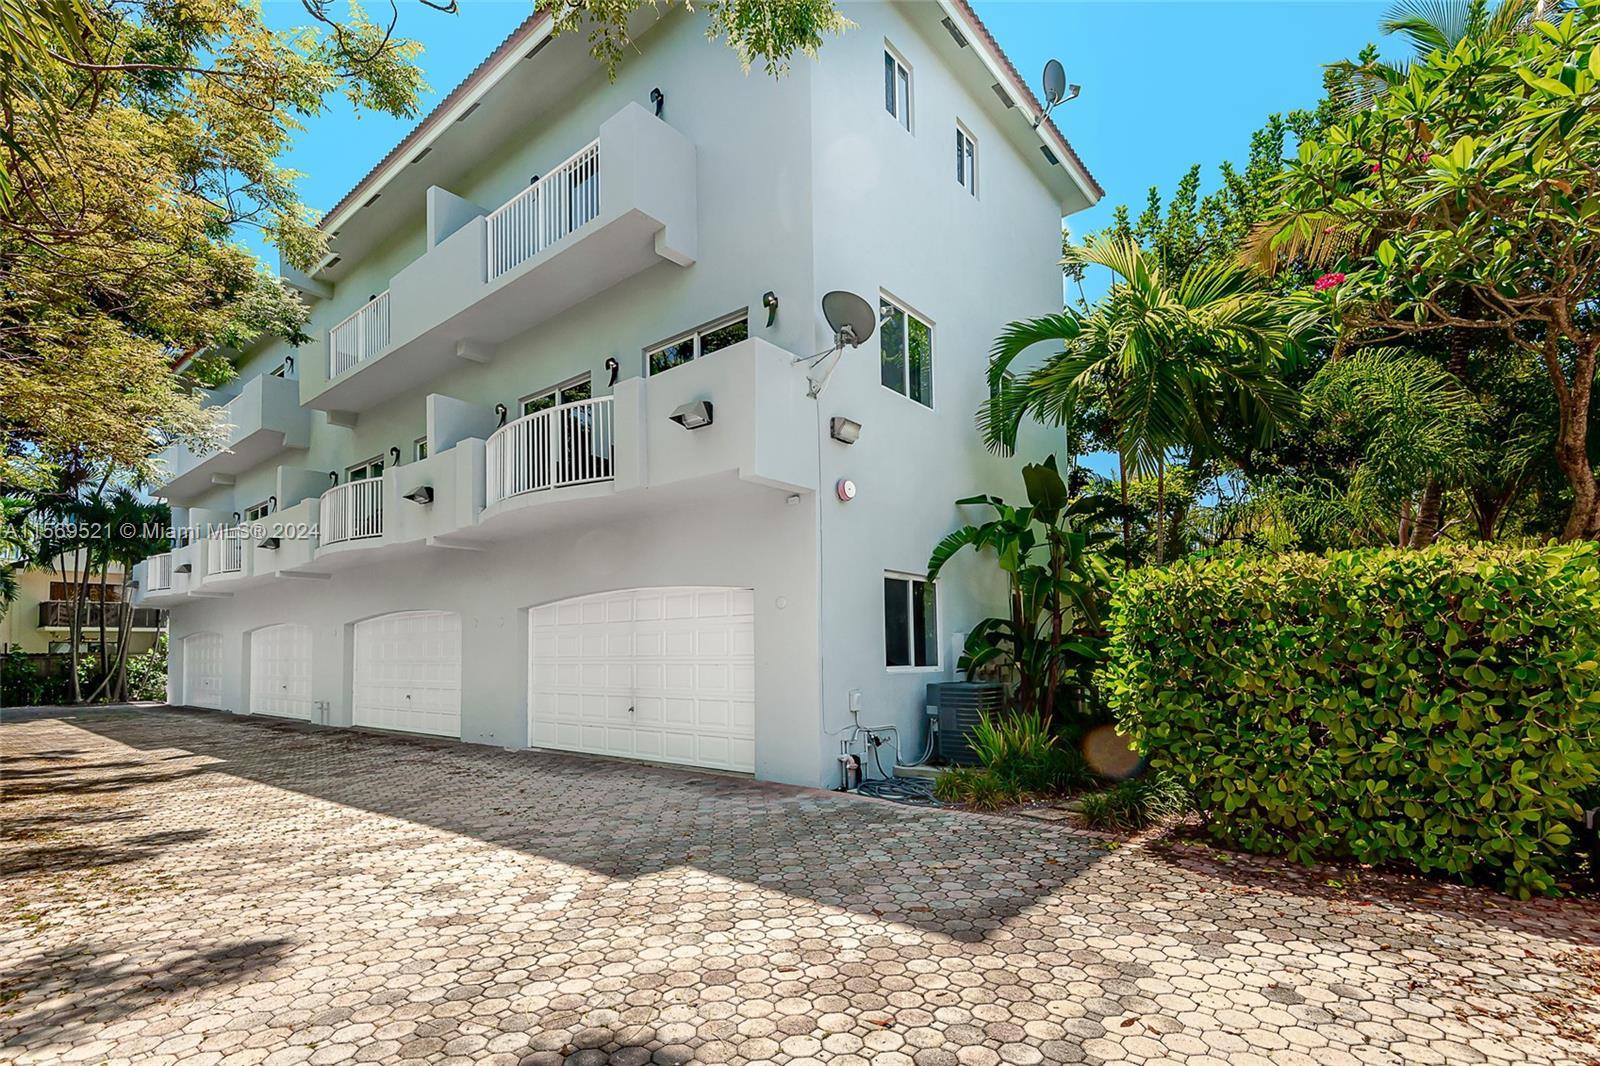 Great opportunity to own a rare multifamily (4 plex) property in Coconut Grove built in 2008.  This 